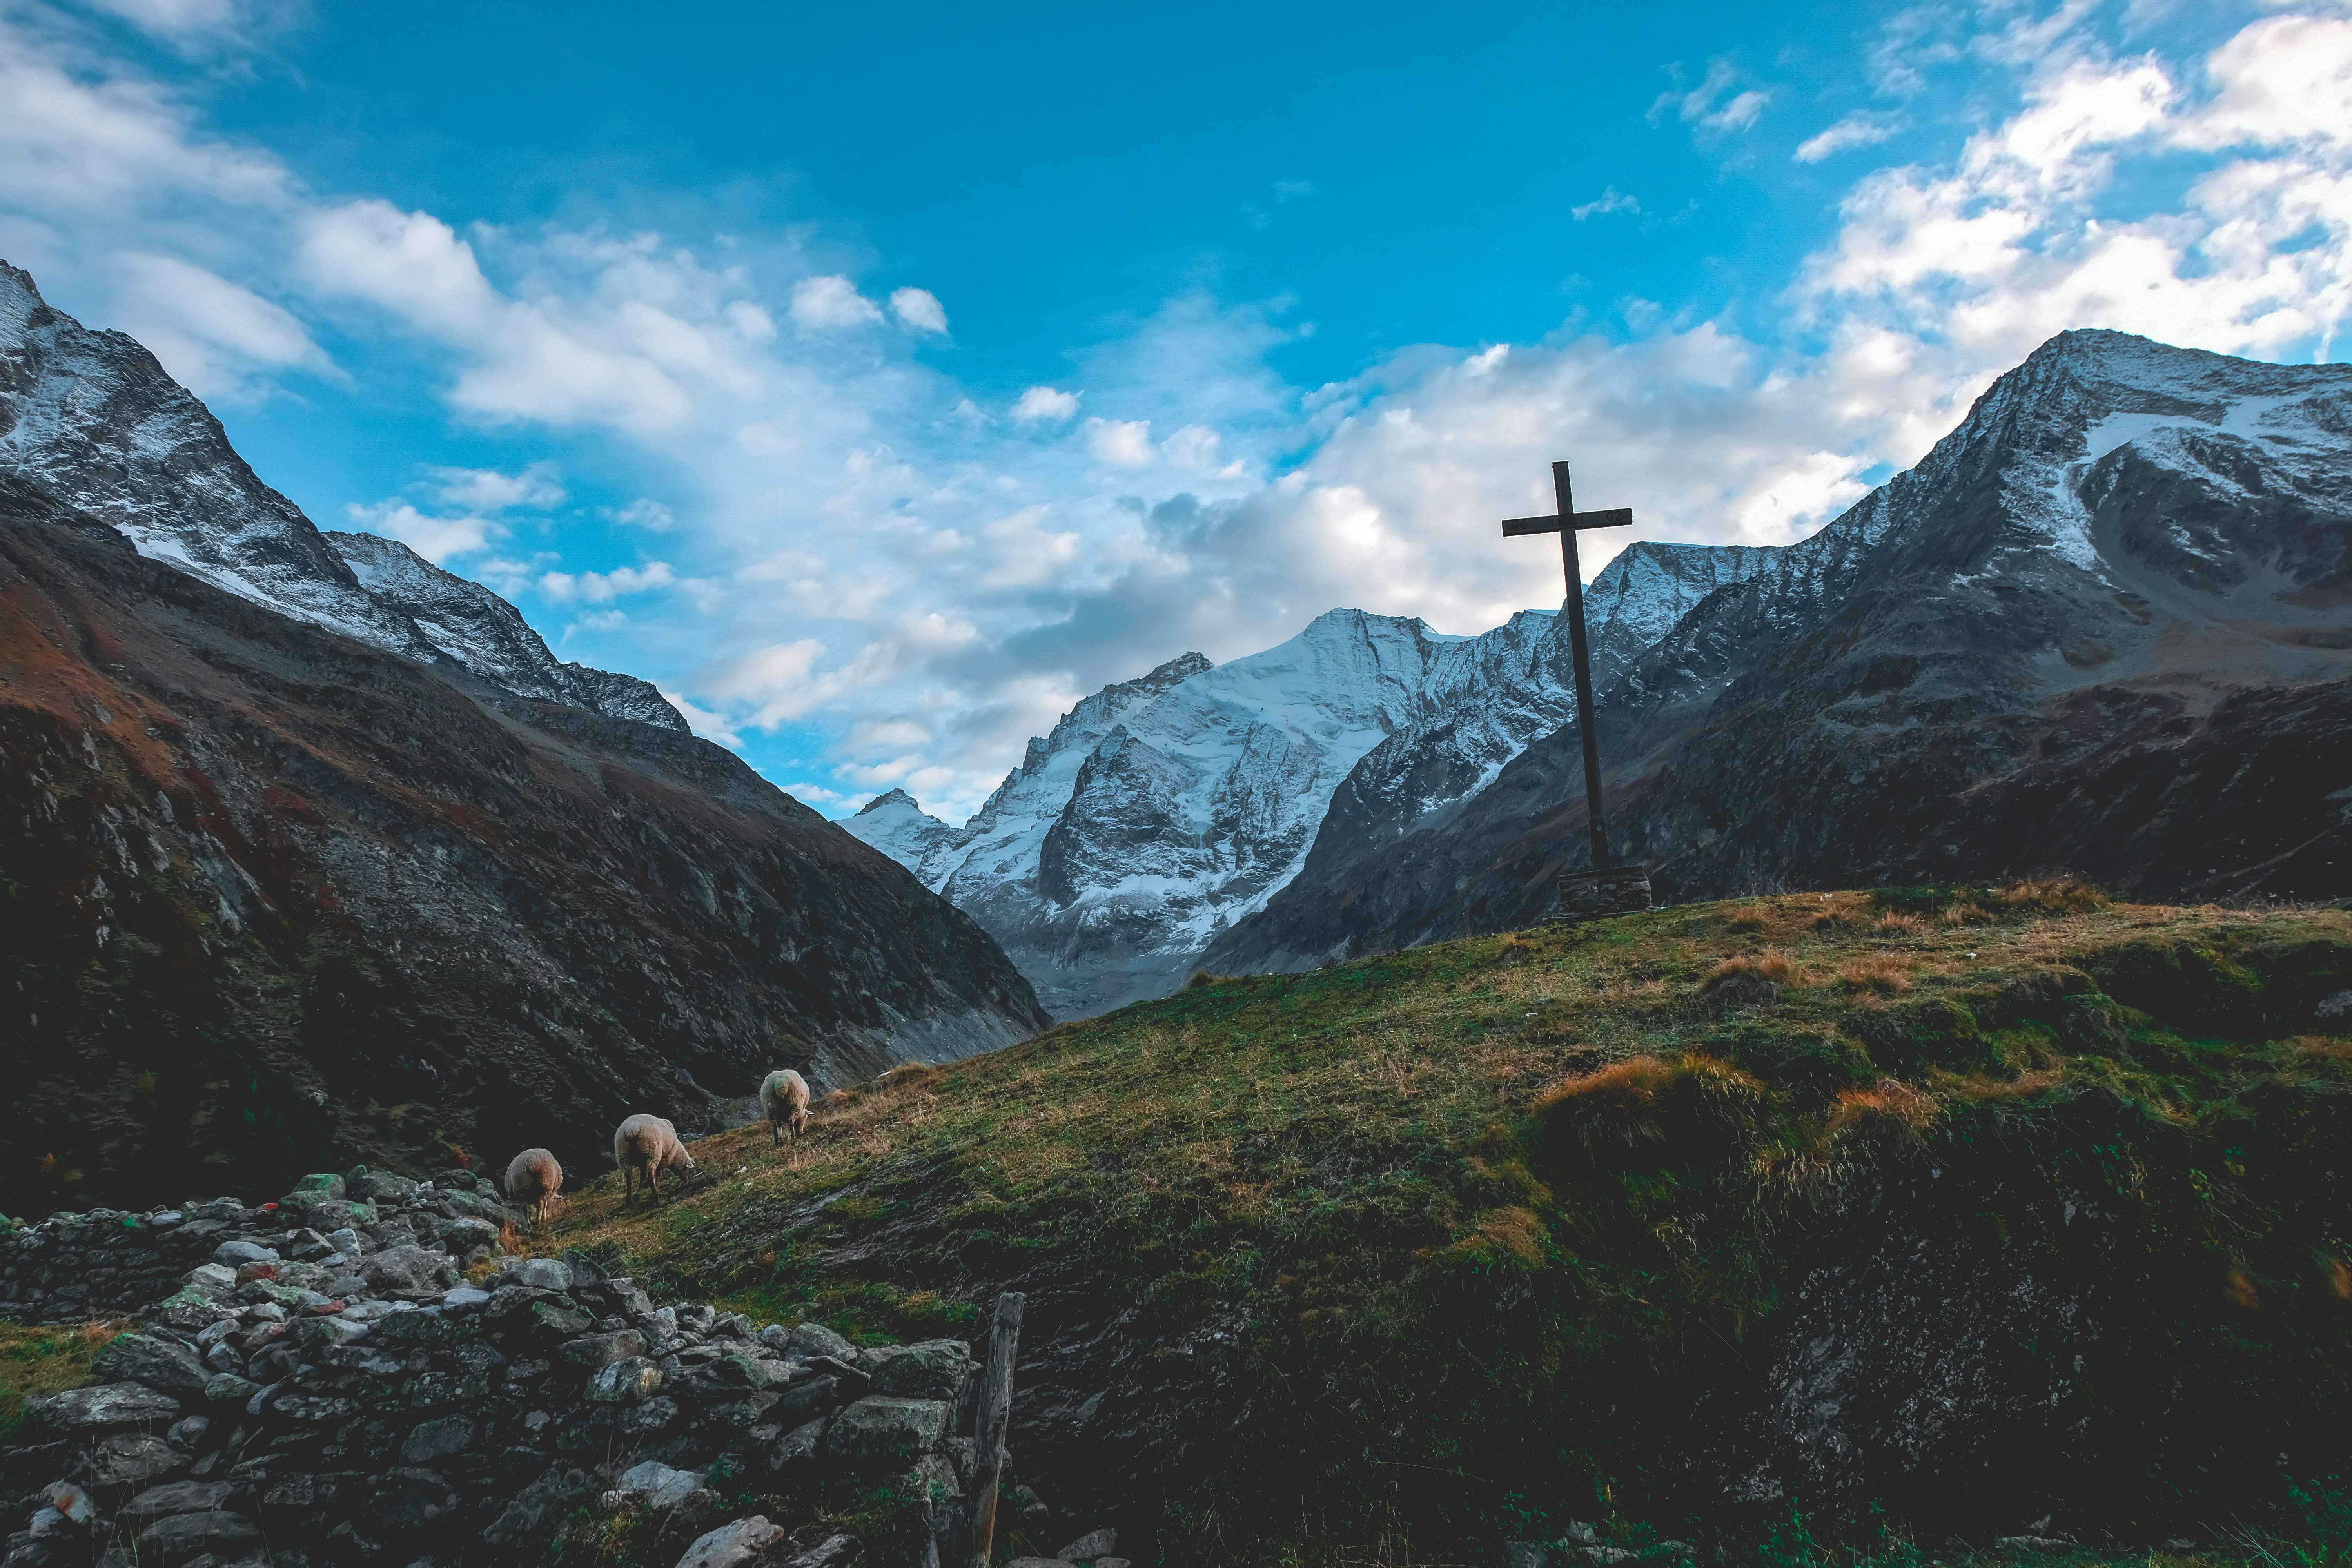 photography of mountain valley with sheeps and cross